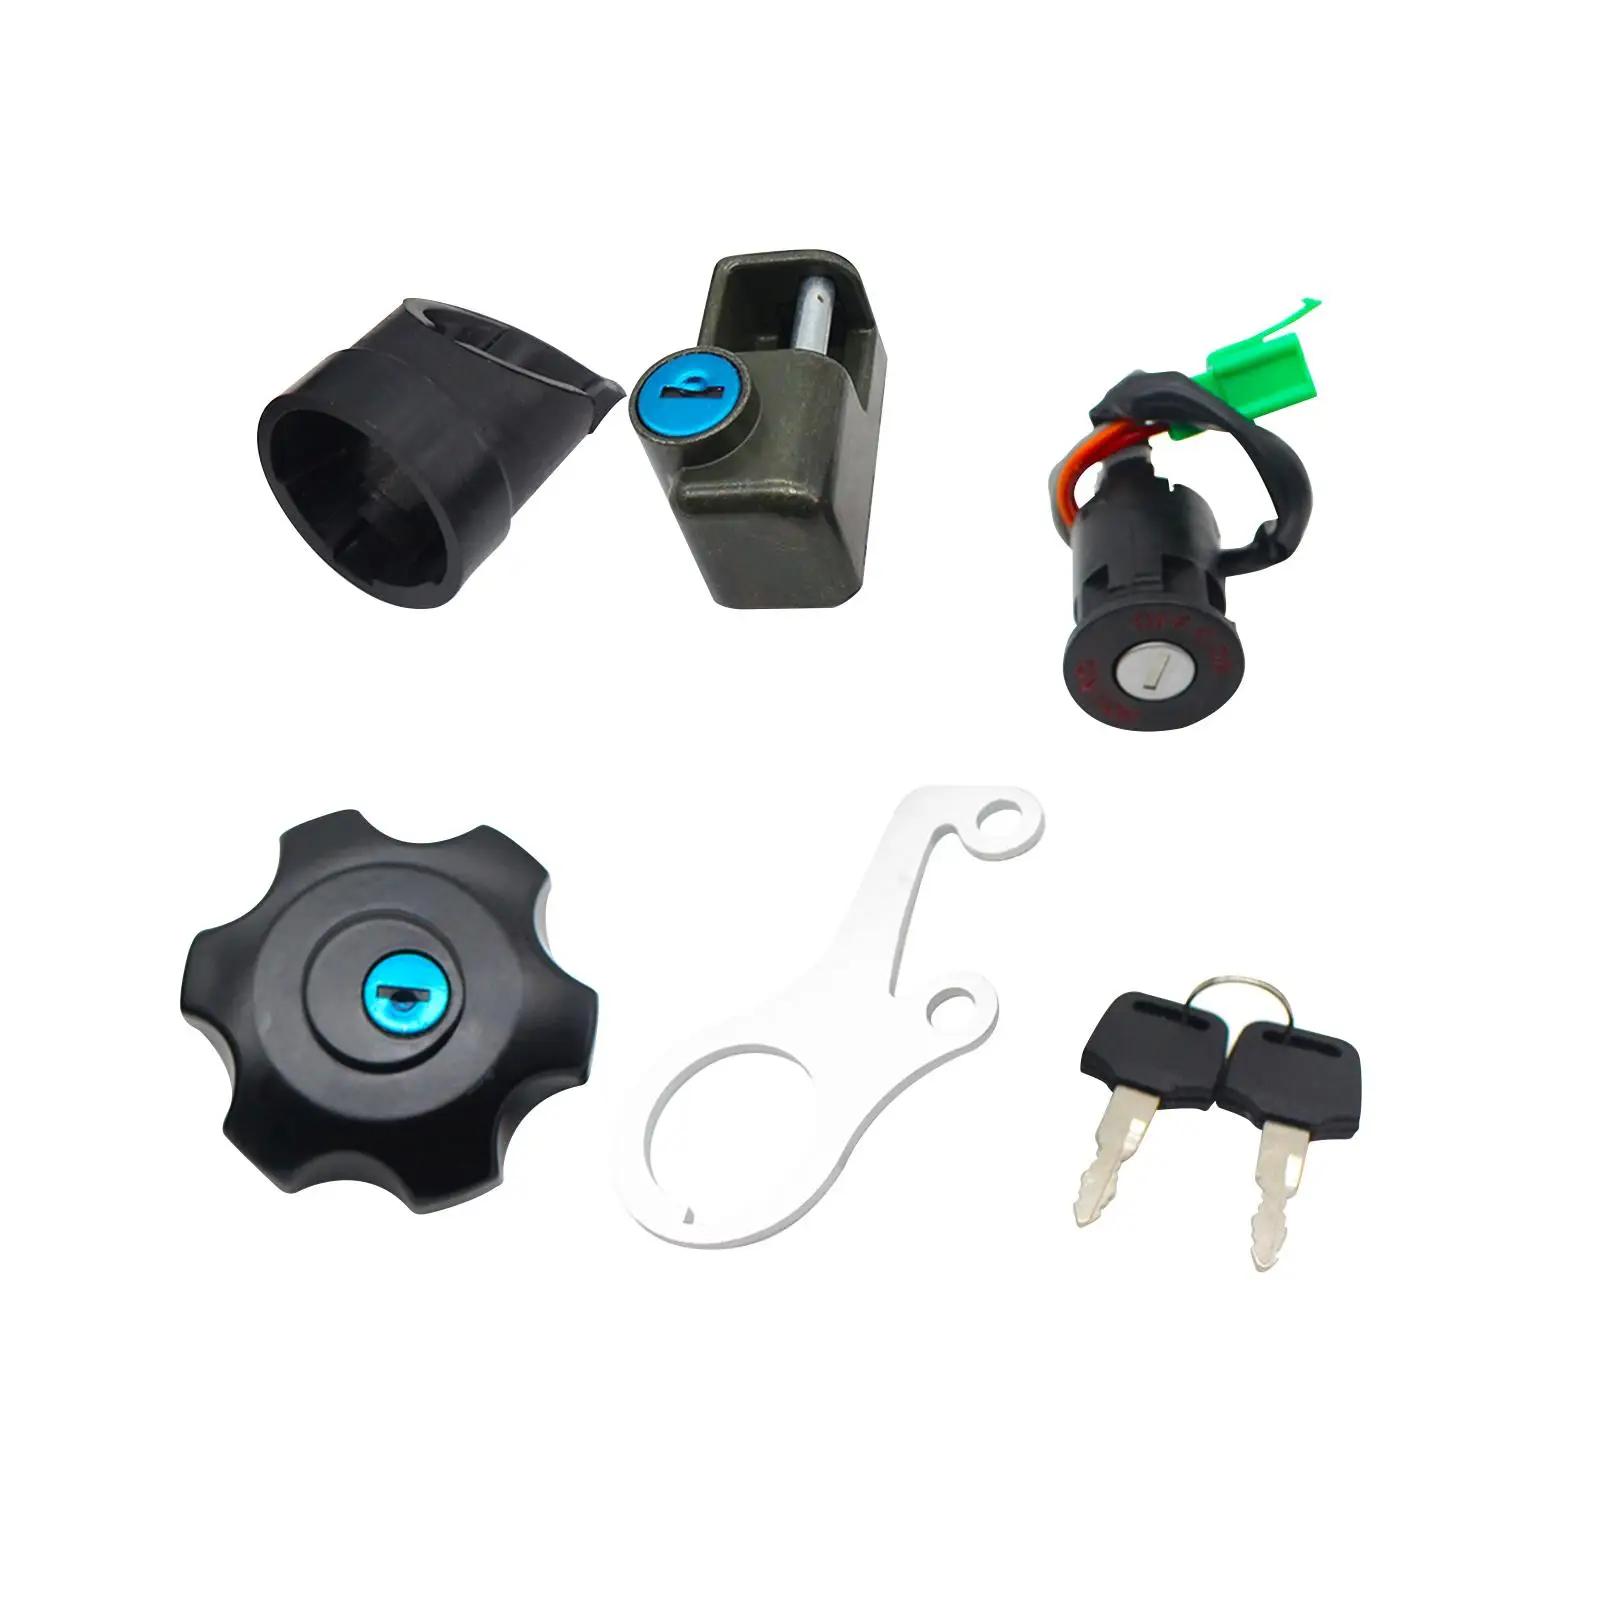 Motorcycle Ignition Switch Fuel Gas Cap Seat Lock Key Kit 37101-29811 44200-29821 for Suzuki Drz400 Motorcycle Accessories